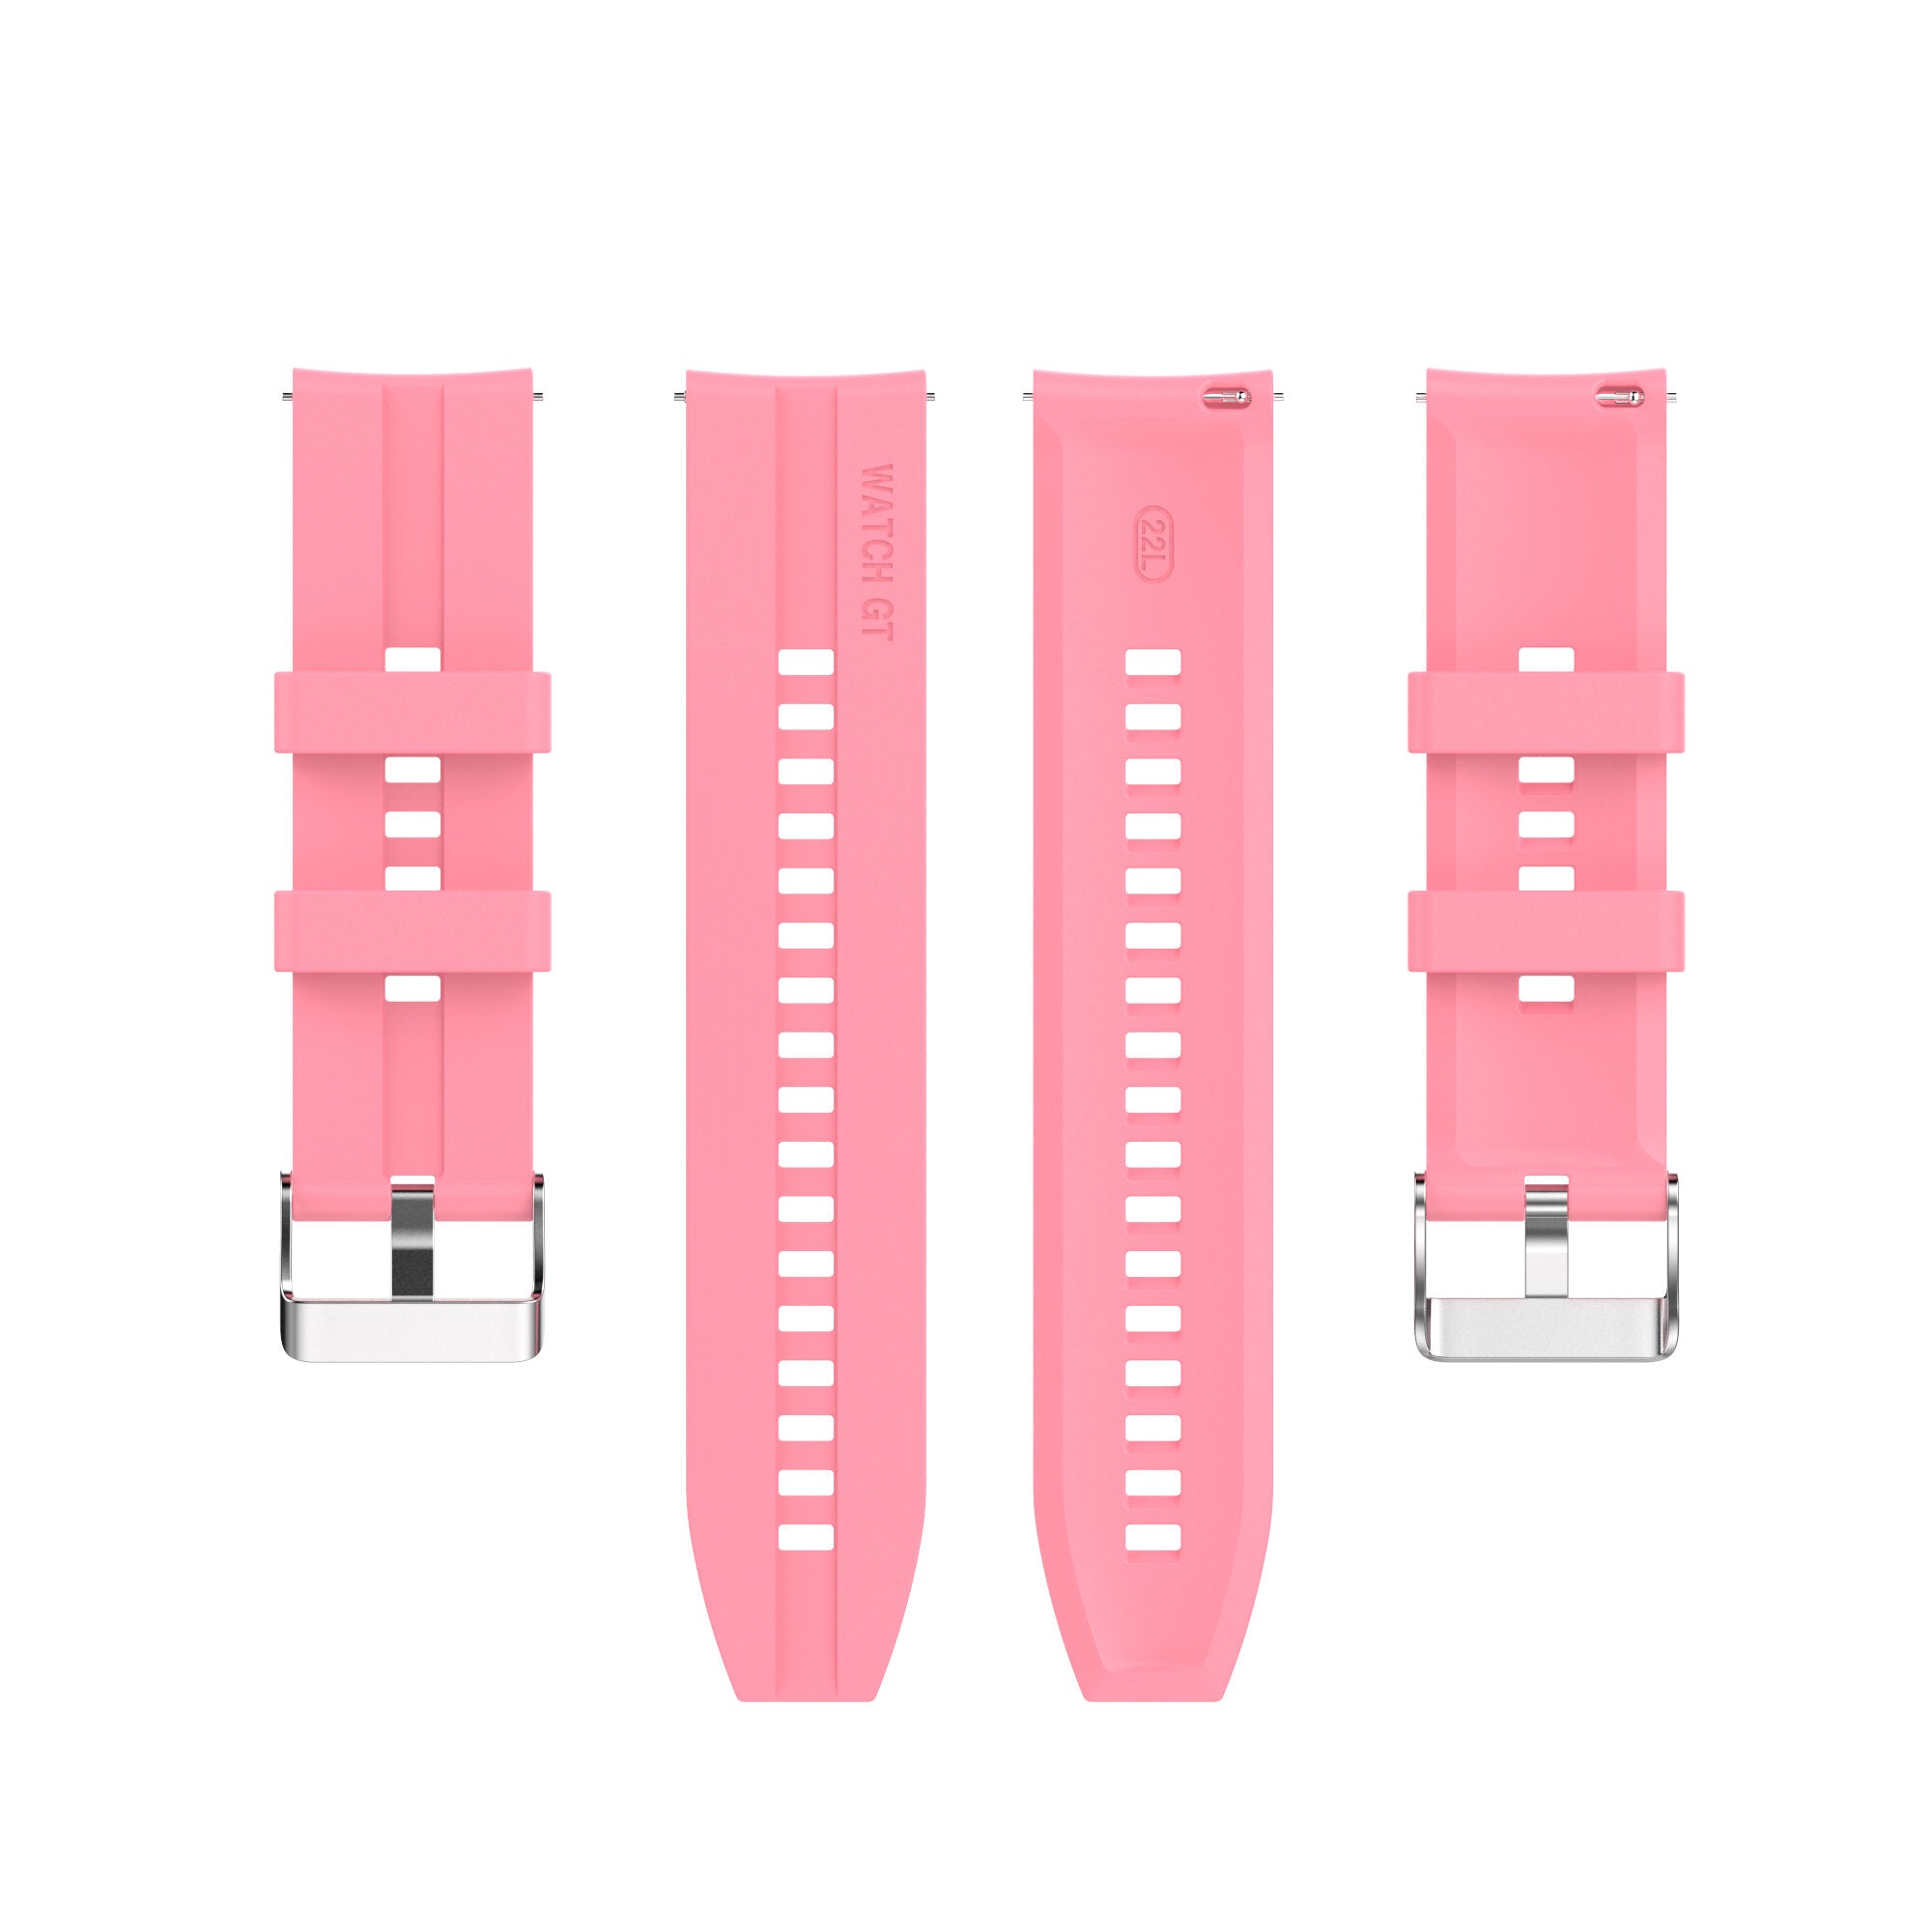 22mm Multi-color Silicone Replacement Strap Smart Watch Band For 46mm Smart Watch